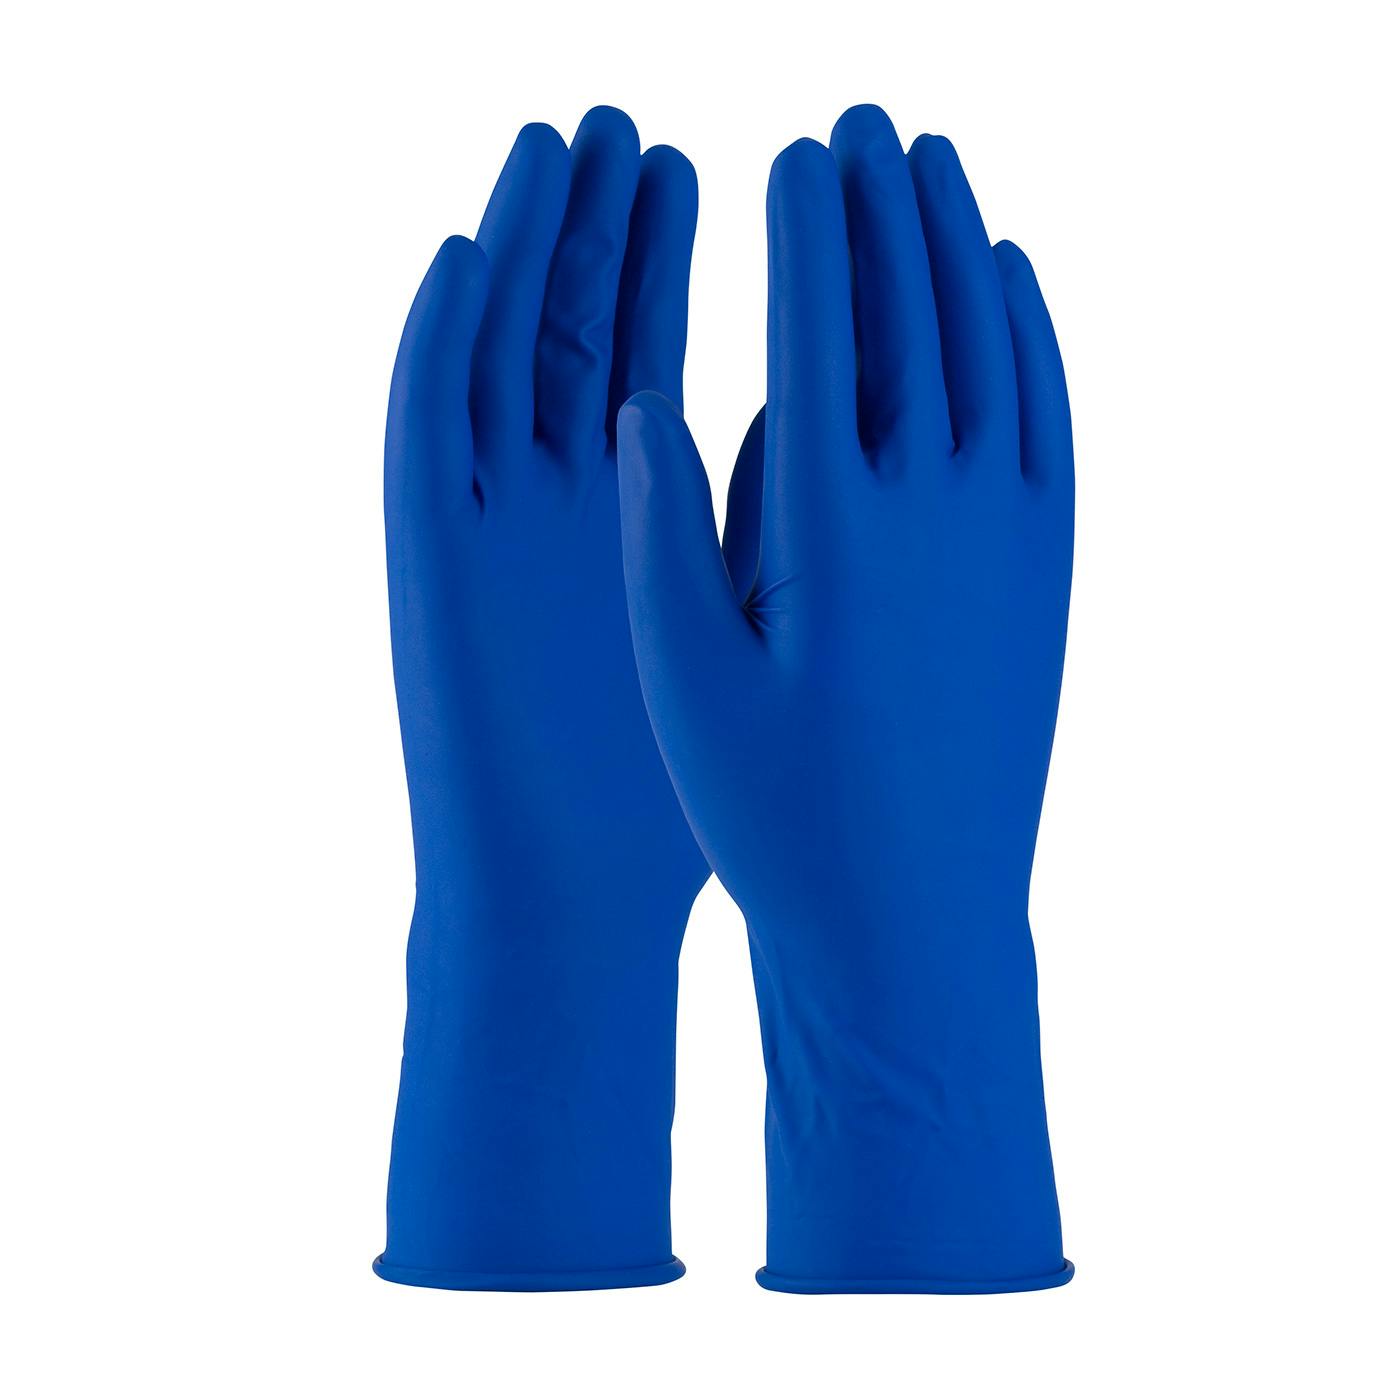 Ambi-dex® Exam Grade Disposable Latex Glove, Powder Free with Fully Textured Grip - 14 Mil (2550)_1